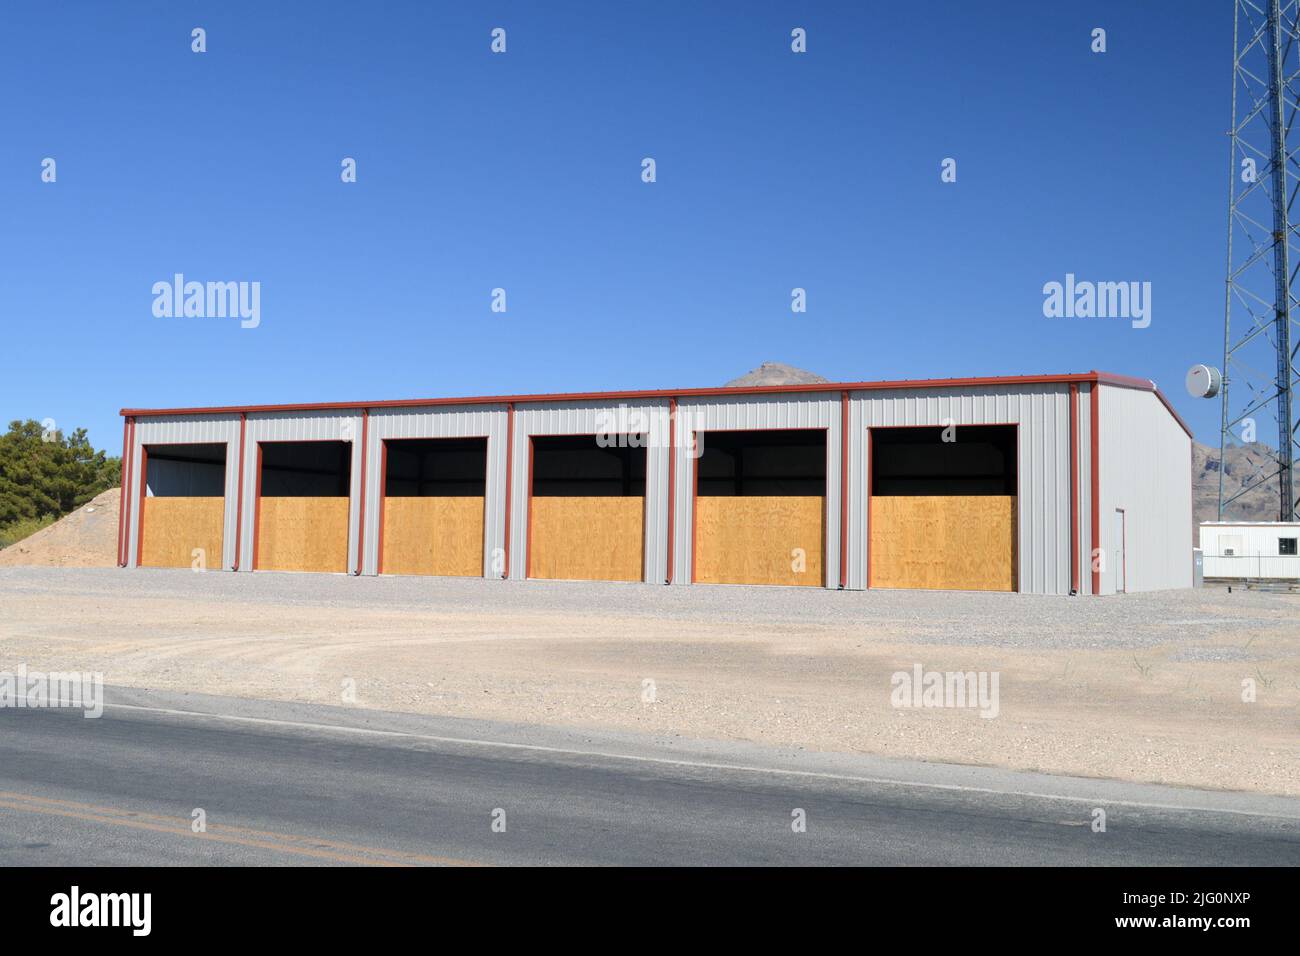 October 19 2021 Pahrump Nevada USA. Pahrump Valley Fire Rescue Service of Nye County Nevada's new fire station 2 is under construction. Stock Photo